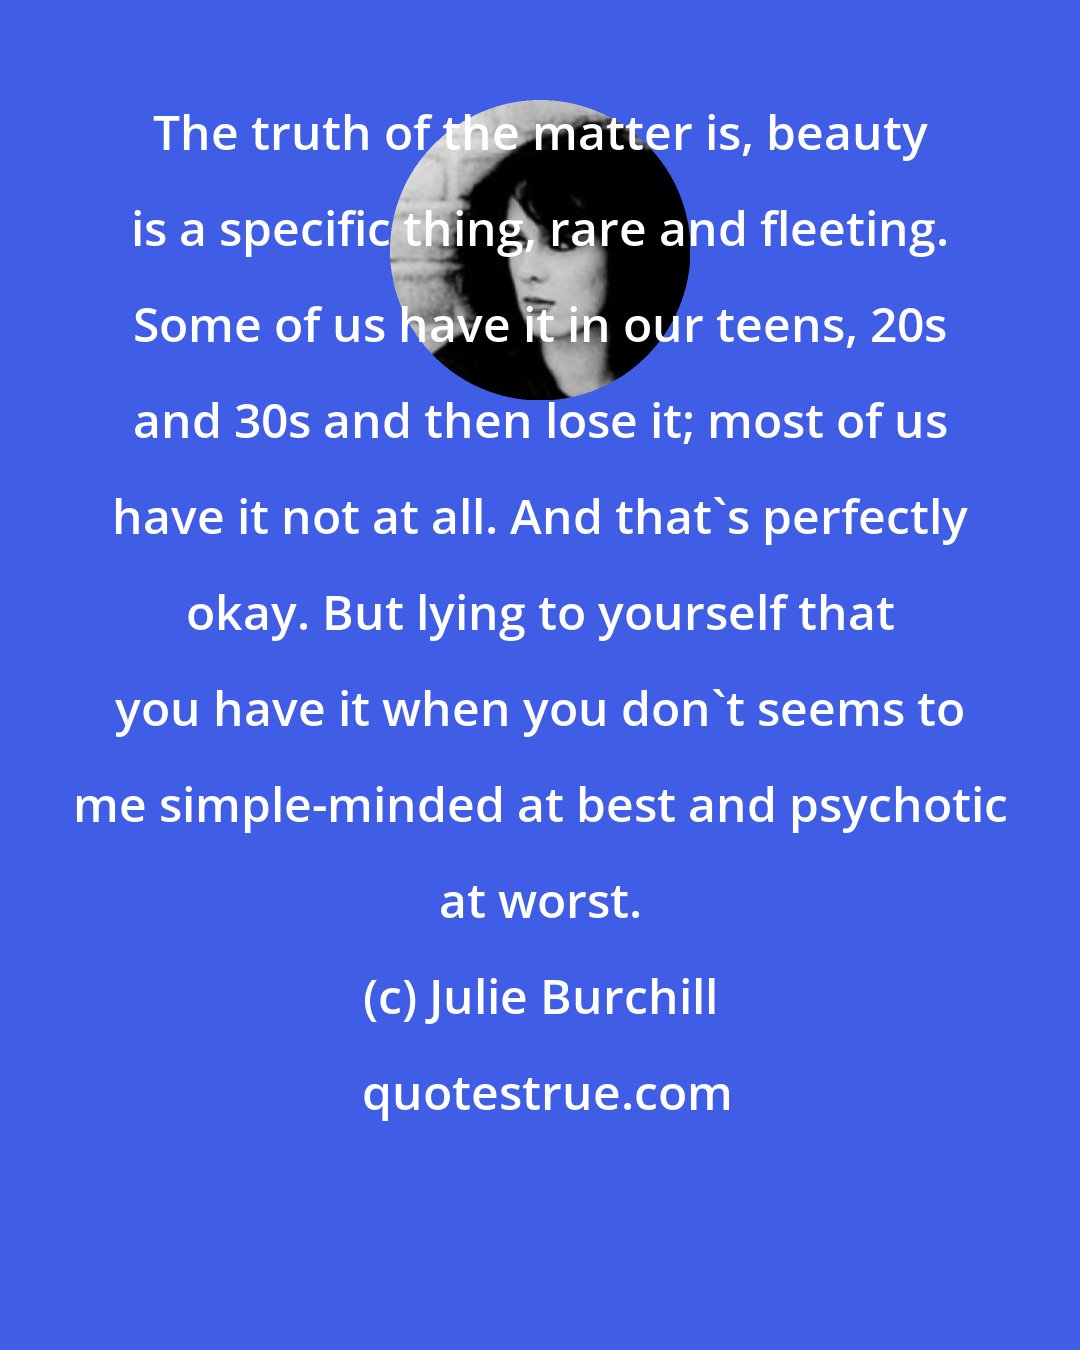 Julie Burchill: The truth of the matter is, beauty is a specific thing, rare and fleeting. Some of us have it in our teens, 20s and 30s and then lose it; most of us have it not at all. And that's perfectly okay. But lying to yourself that you have it when you don't seems to me simple-minded at best and psychotic at worst.